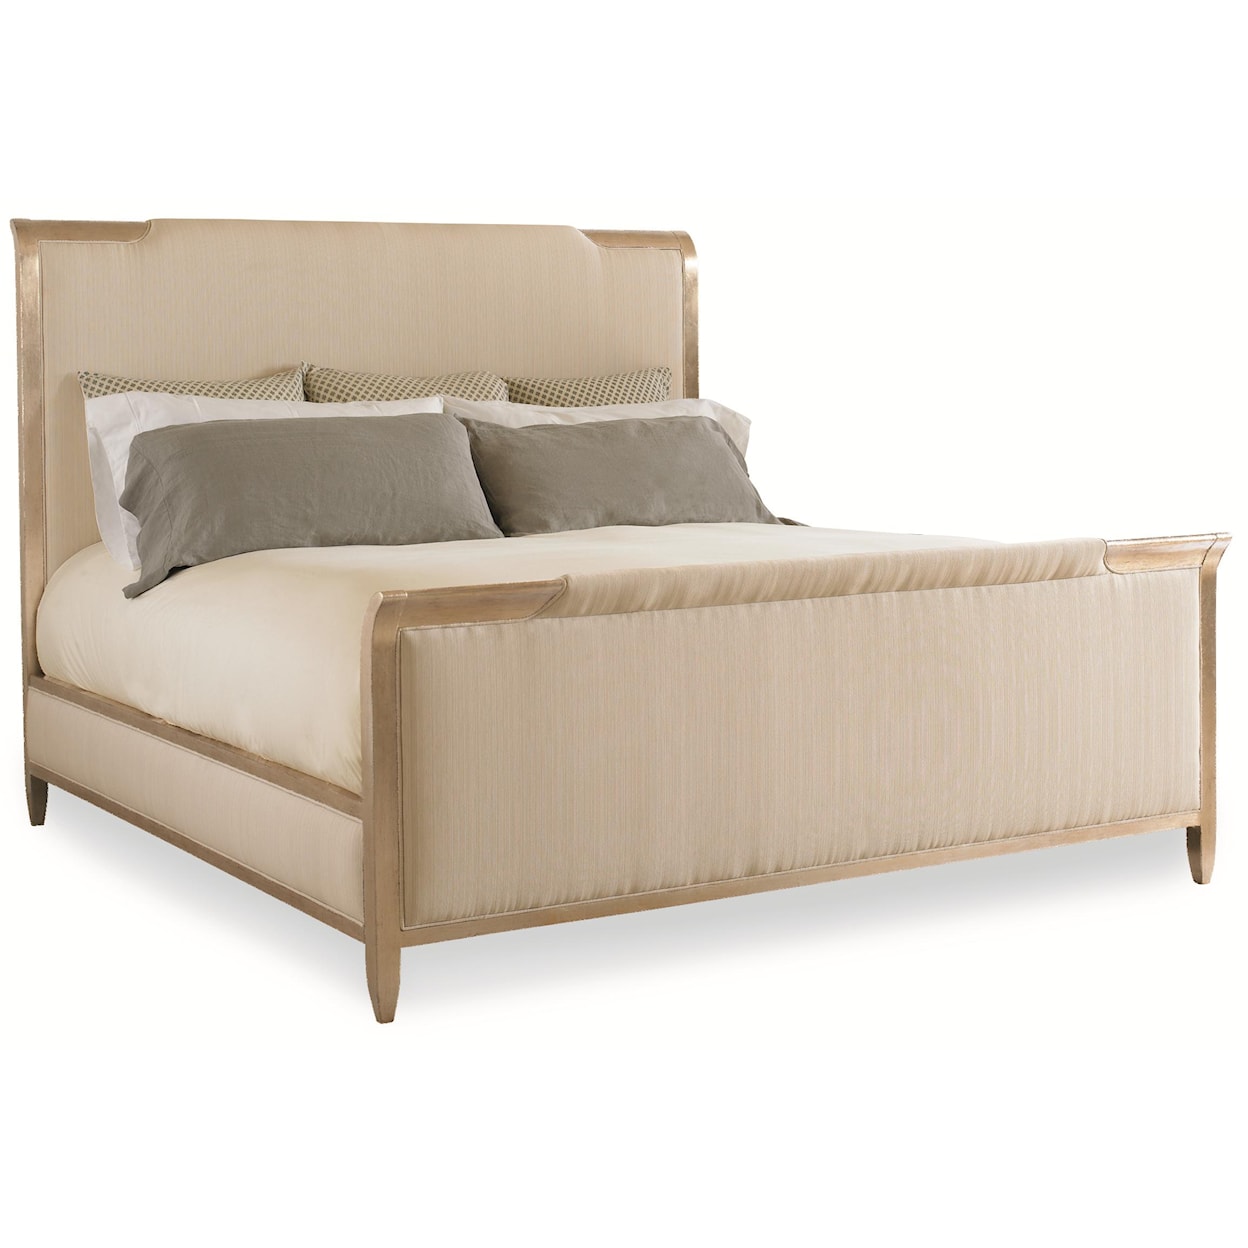 Caracole Caracole Classic Cali King "Nite in Shining Armor" Bed